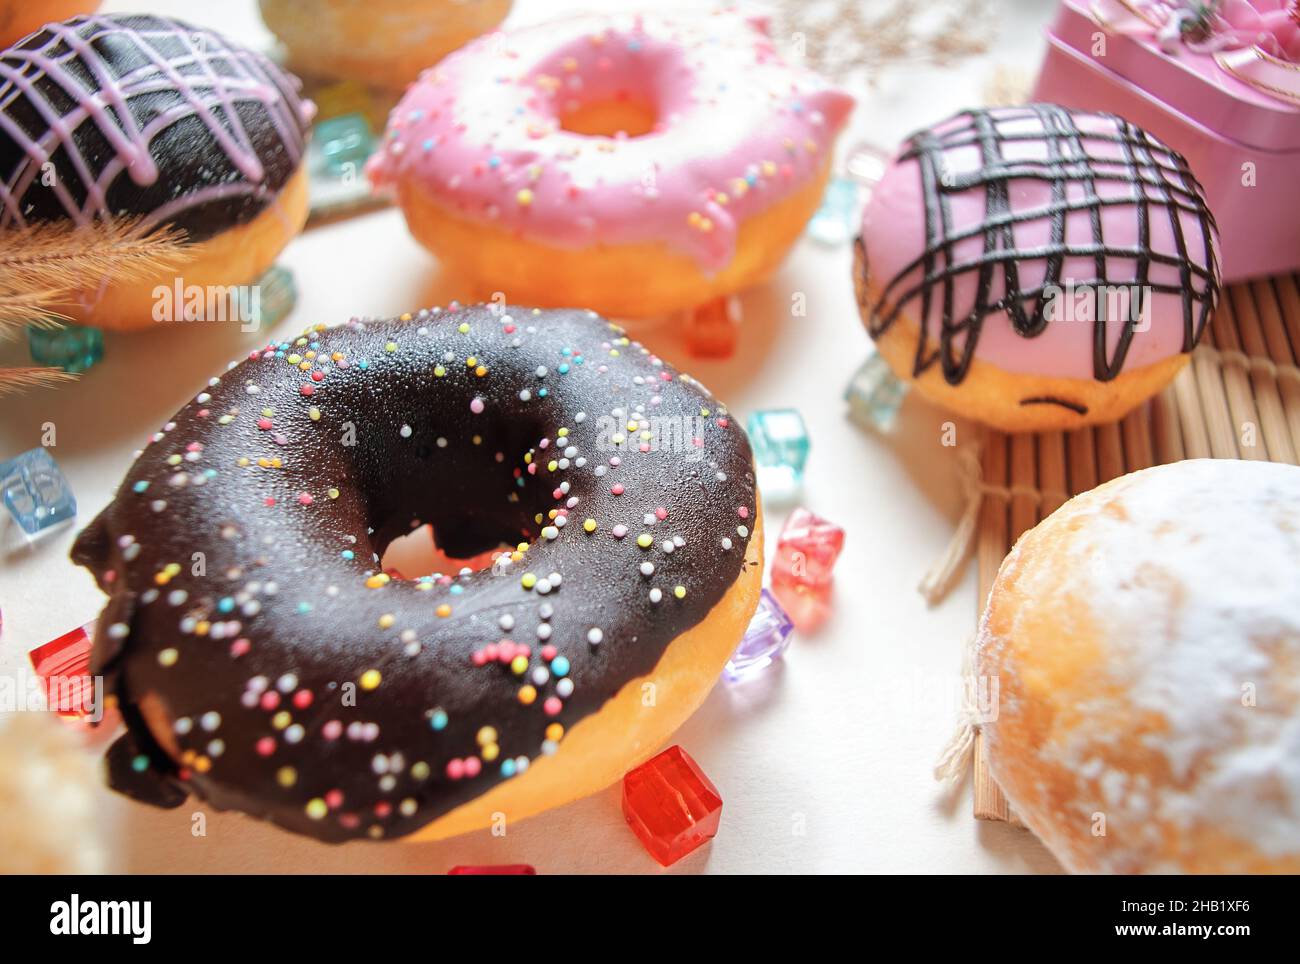 The various colors and taste glazed donuts on the table Stock Photo